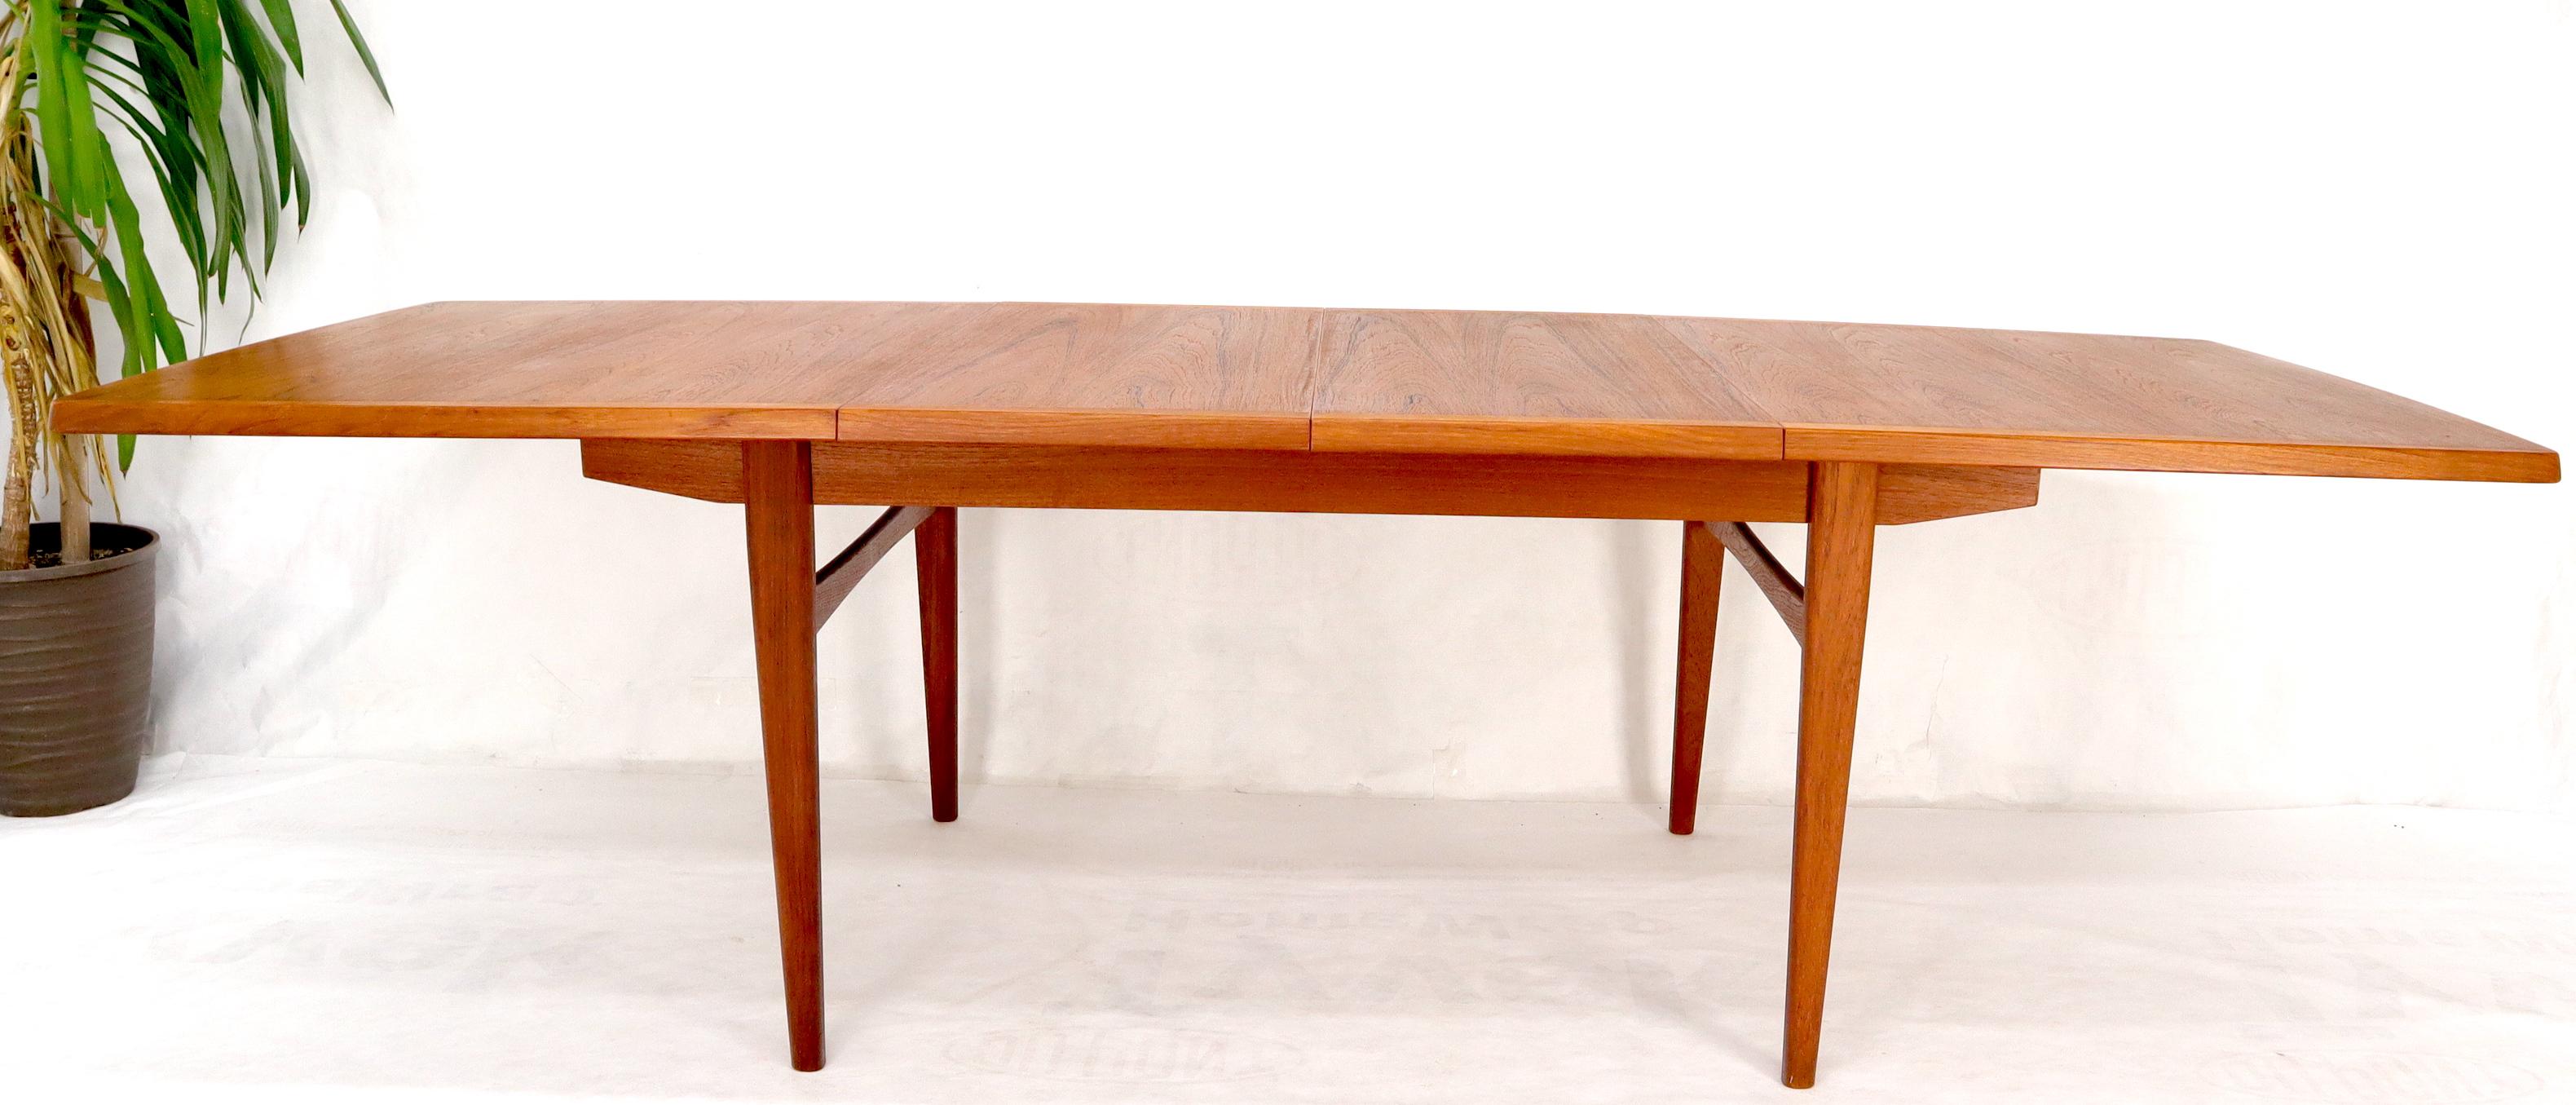 Danish Mid-Century Modern Teak Dining Table with Two Extension Boards Leaves 5